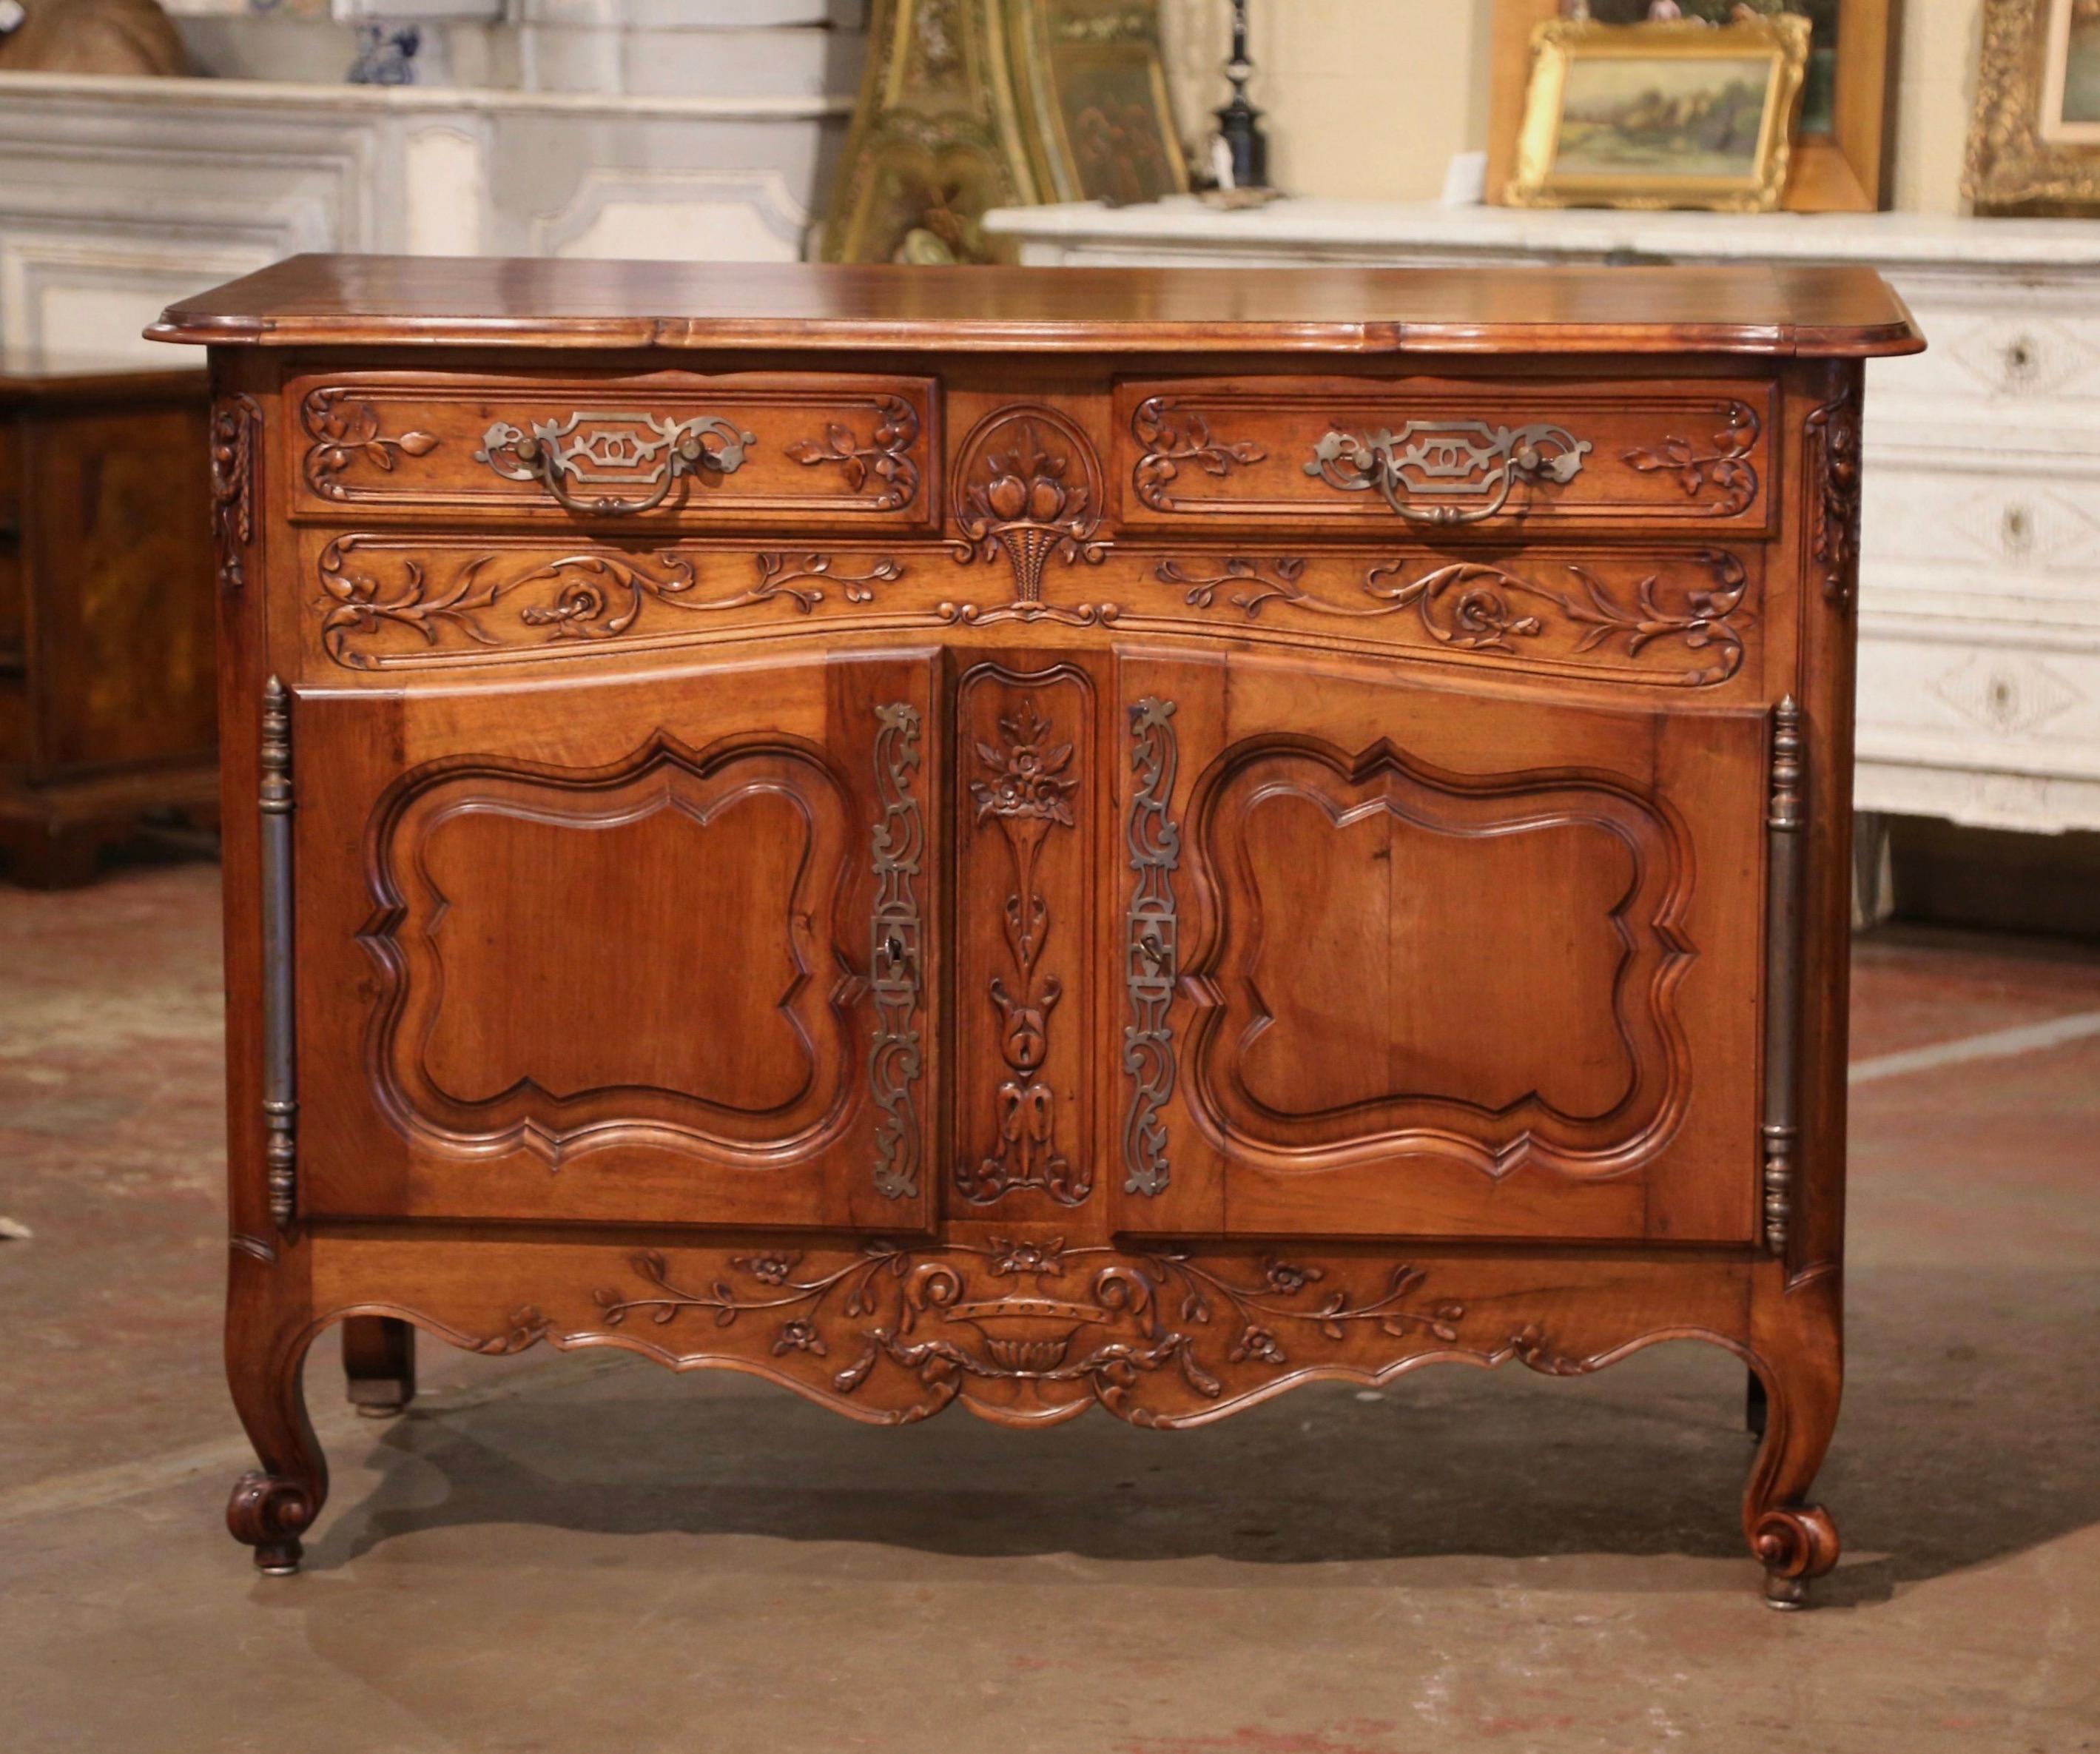 This elegant, antique fruit wood sideboard was carved in Southern France, circa 1890. The Classic sideboard exemplifies the Louis XV style with a heavy presence, dramatic lines and intricate floral and foliage carvings throughout. The cabinet stands